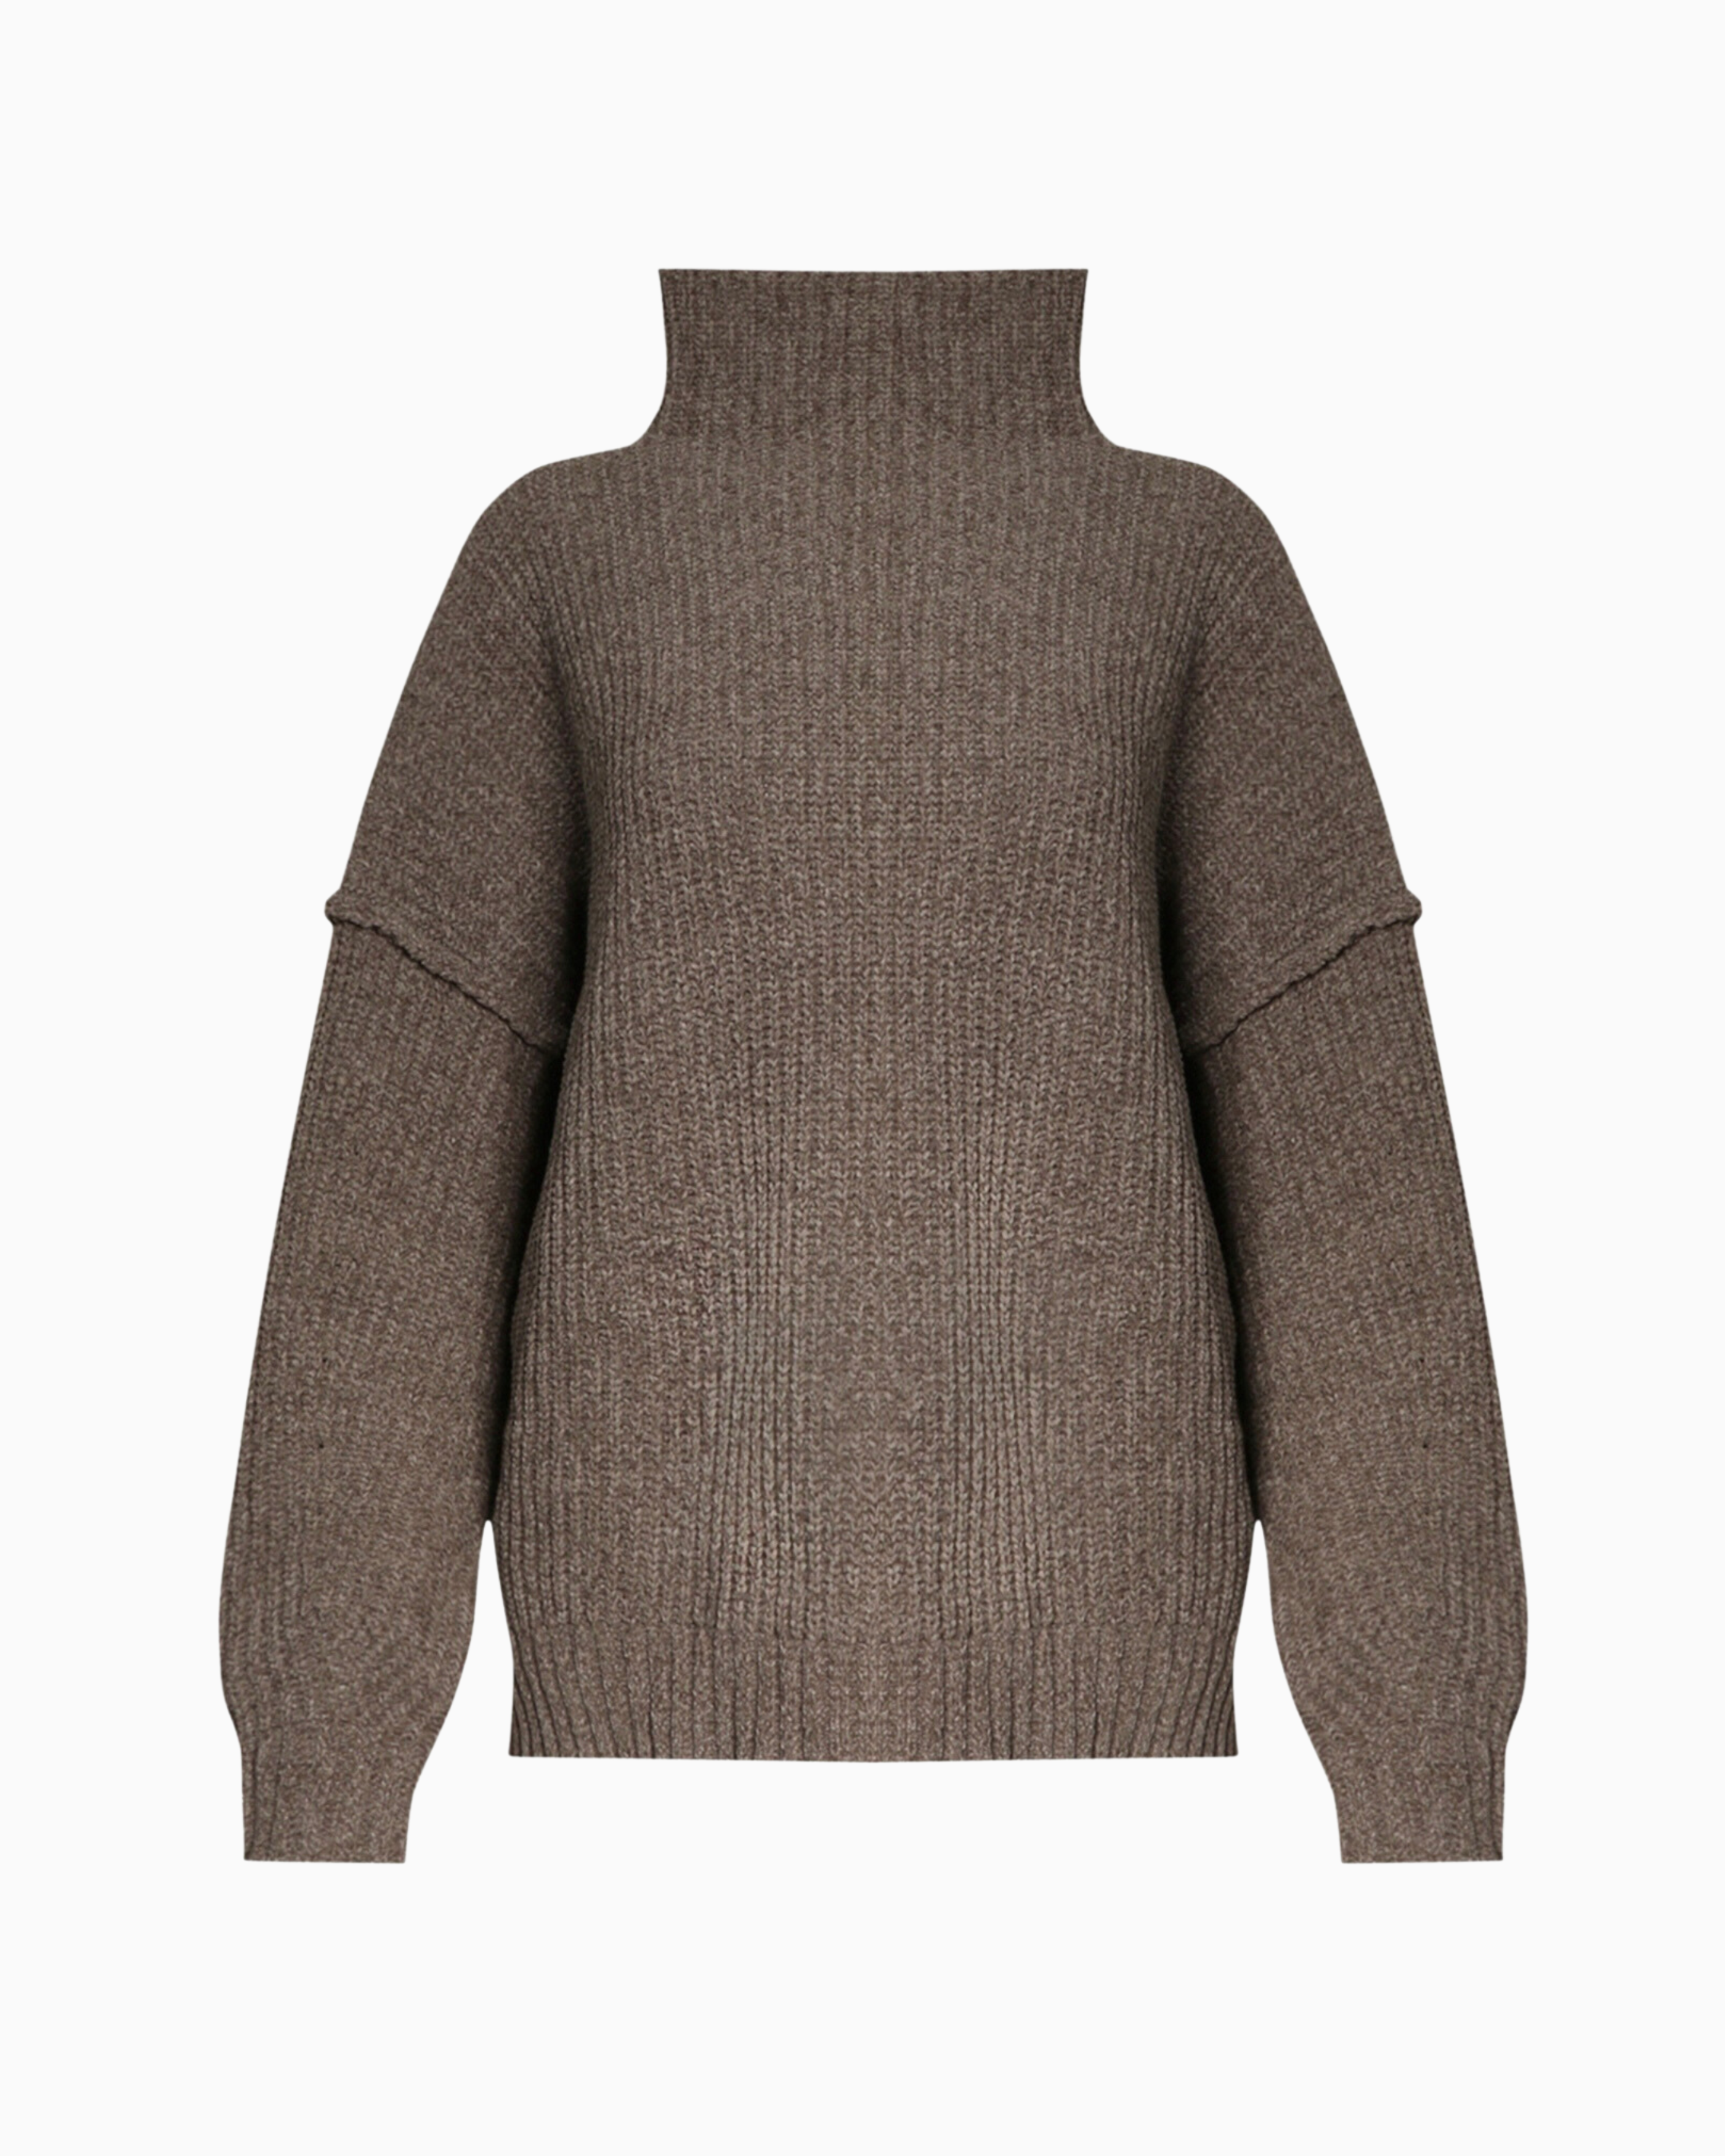 R//C Mock Neck Sweater in Brown